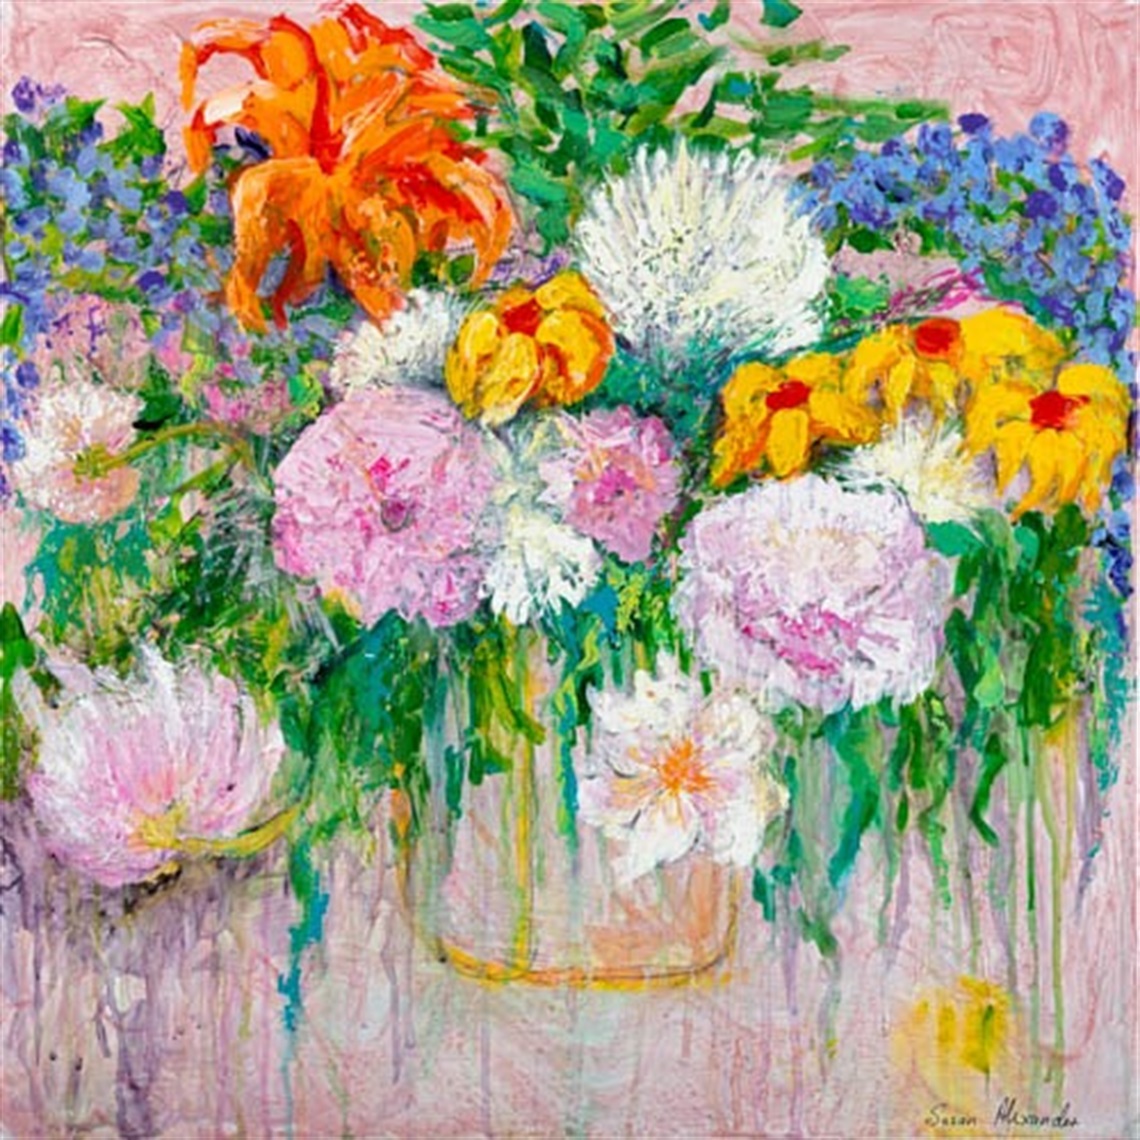 Expressive painting of colourful flowers in a vase